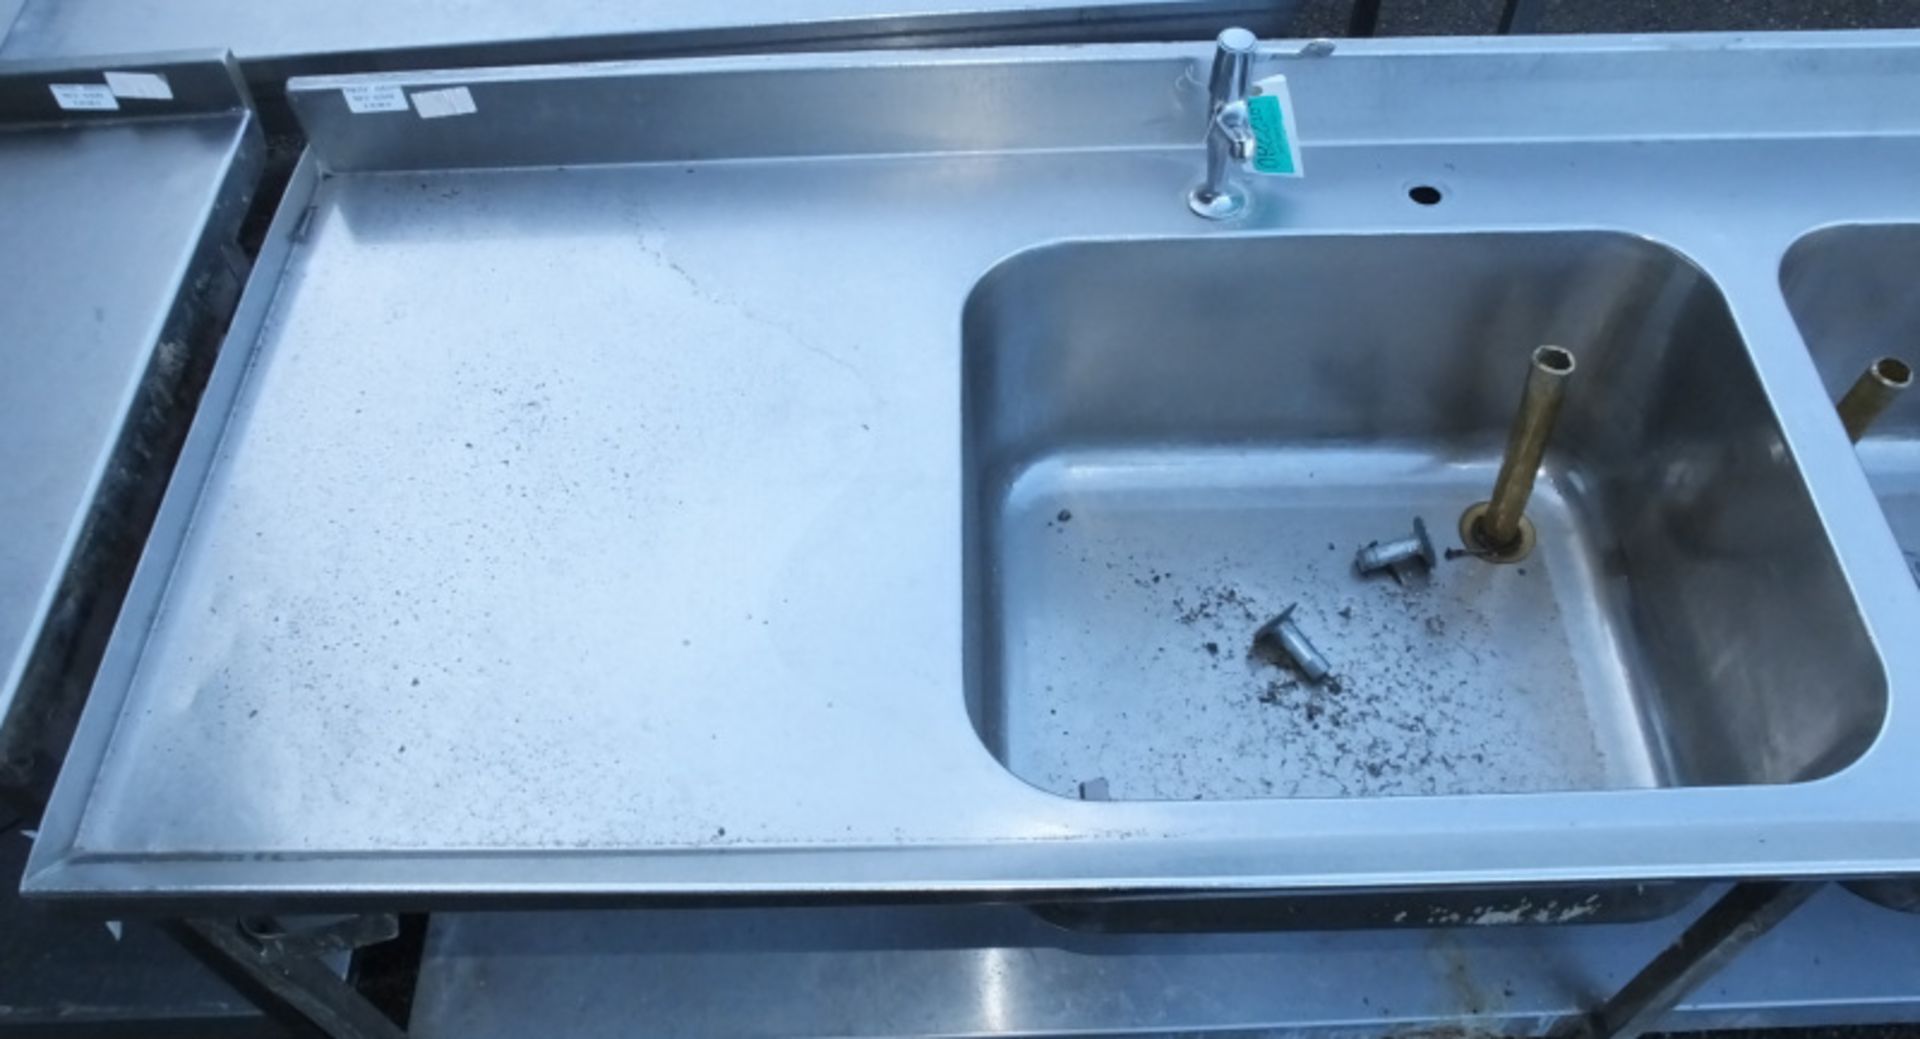 Stainless Steel Double Sink Countertop L 2400mm x W 700mm x H 900mm - Image 2 of 5